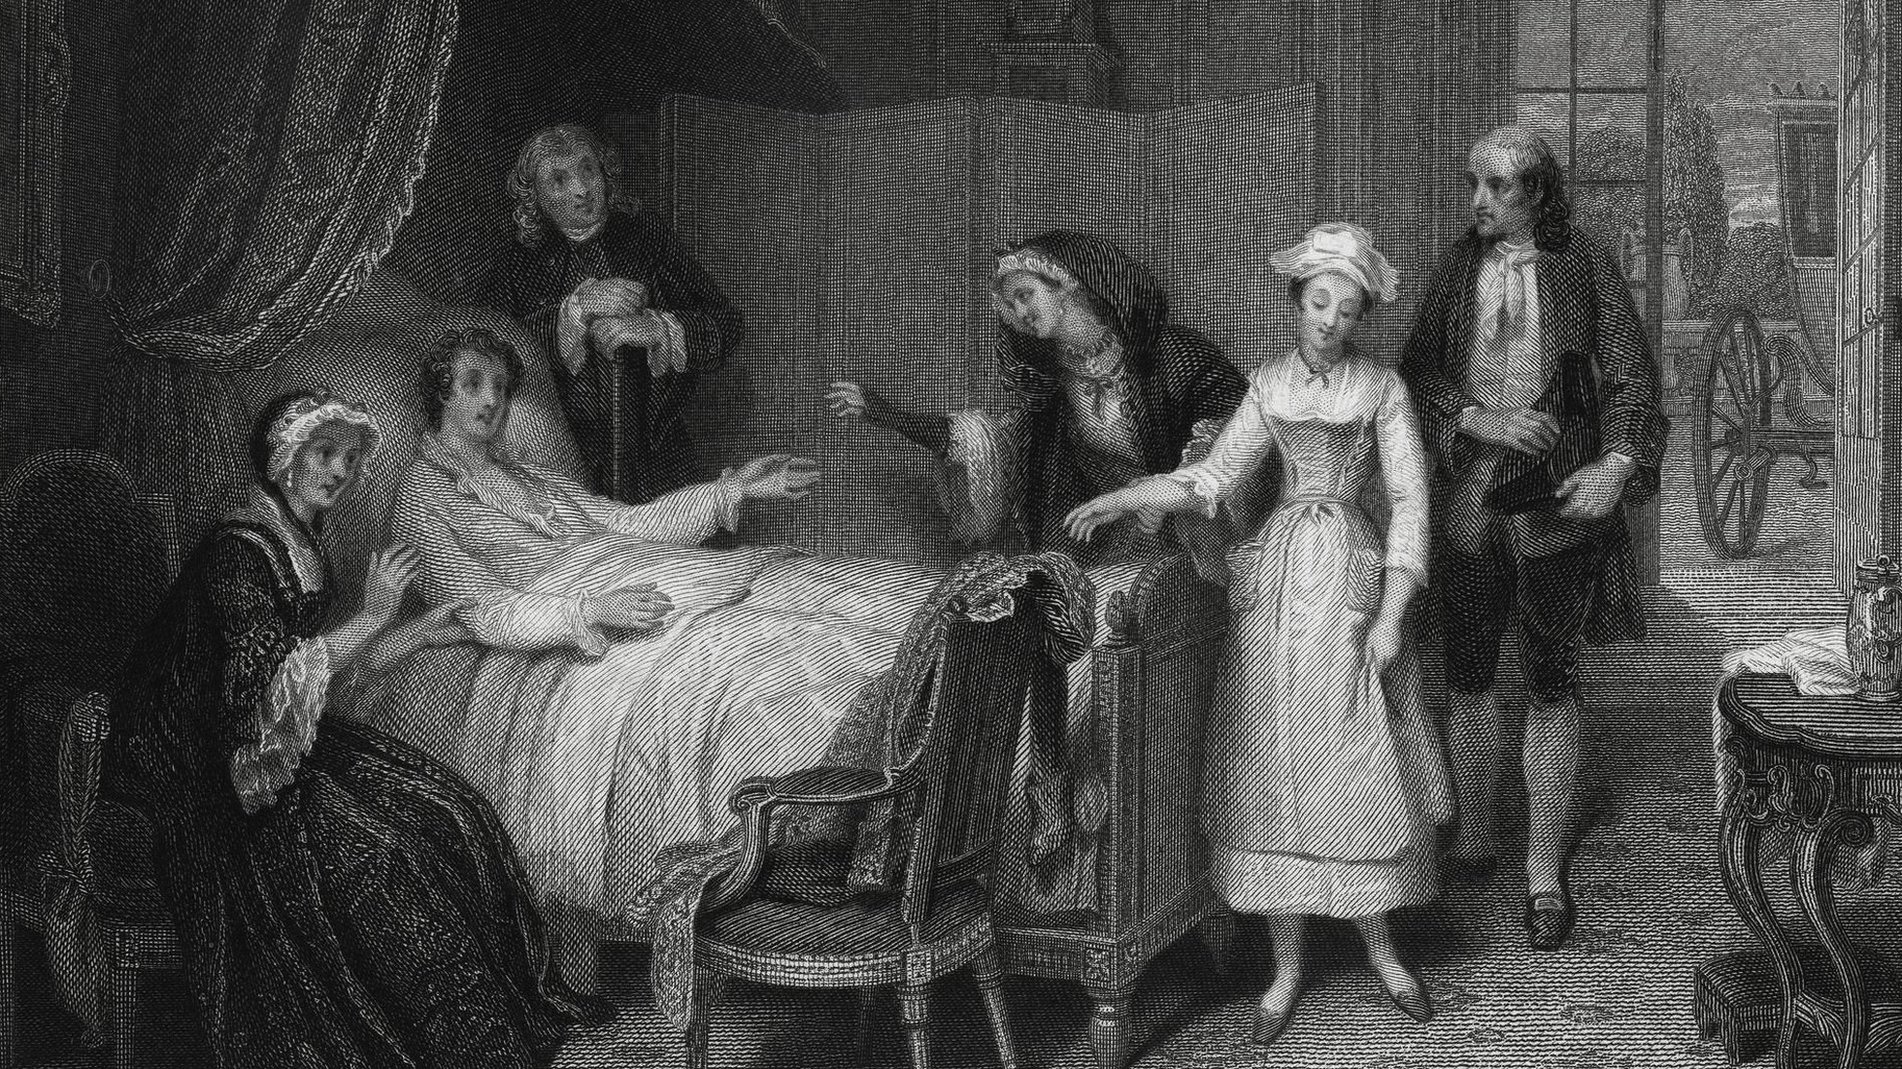 A man is visited by women while lying in his bed